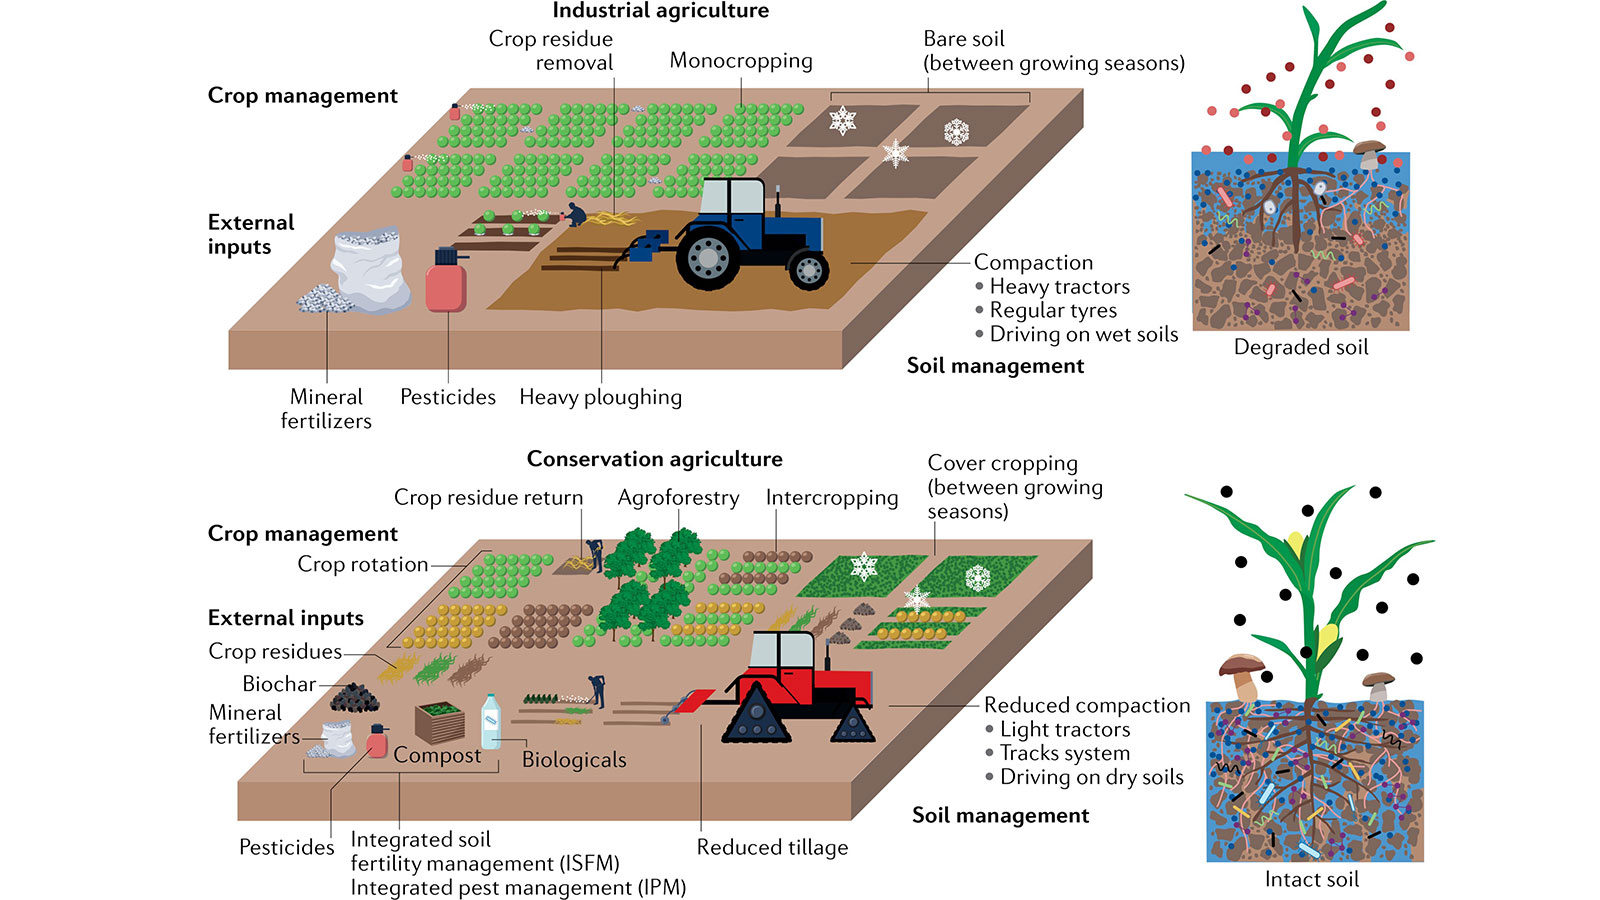 Industrial agriculture focuses on maximizing yields and often relies on intensive soil management, chemical fertilizers and pesticides, and the use of highly productive plant material in simple cropping systems, which may result in structural degraded and functionally limited soils. Conservation agriculture adapts protective approaches related to soil management (reduced tillage and soil-protecting vehicles), crop management (crop diversification and cover cropping) and external inputs (organic amendments and biologicals), ultimately conserving soil structure, the flow of resources, and soil biodiversity and functioning.